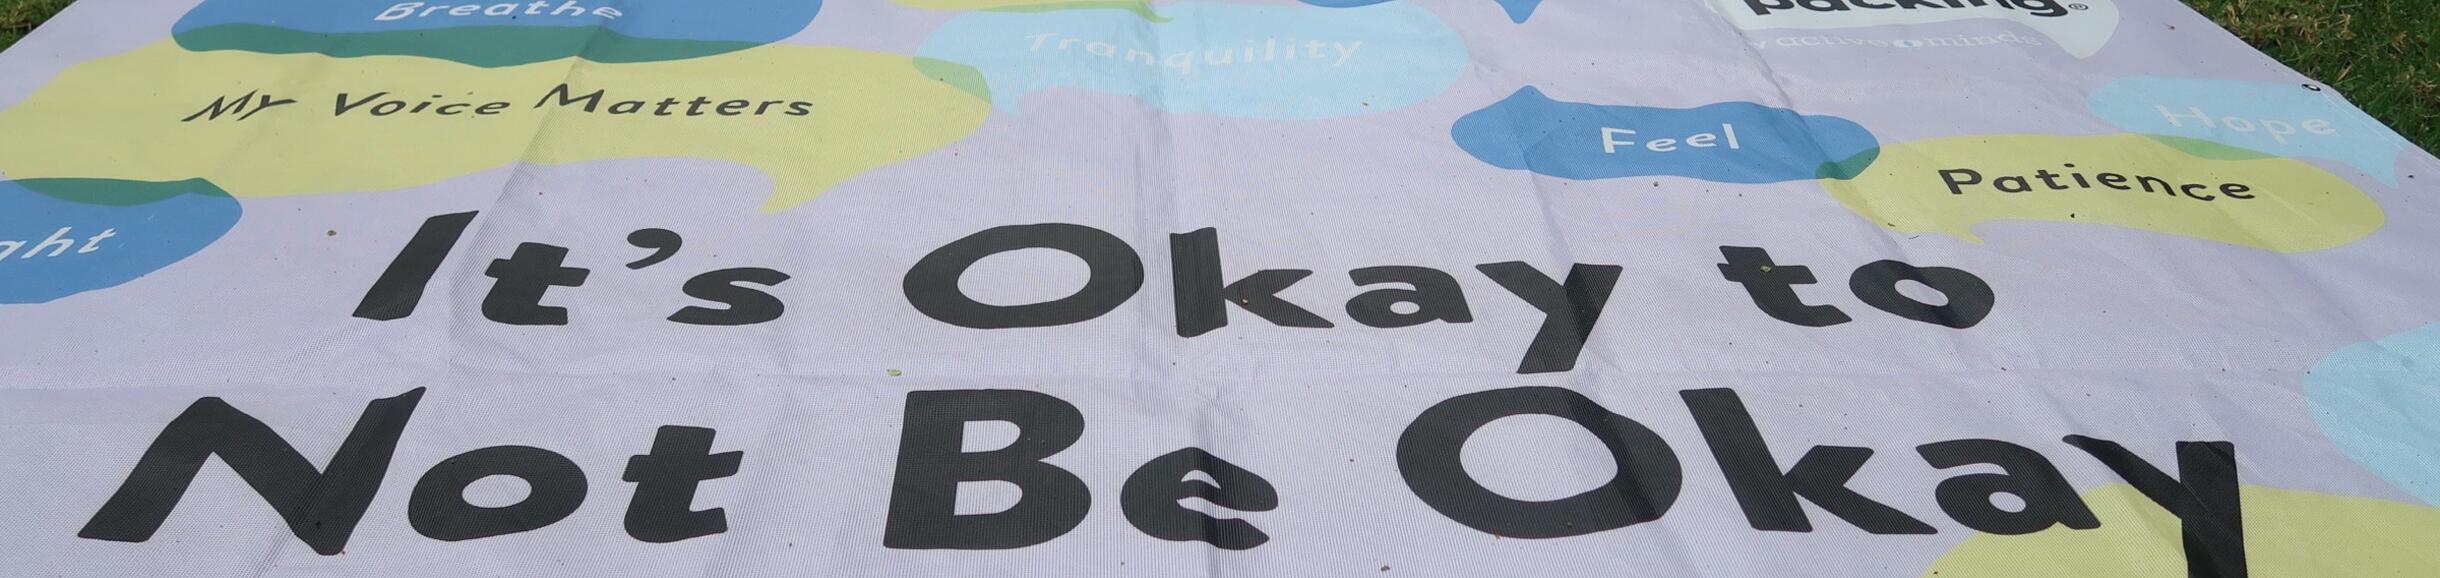 Banner laying on grass that states "It's okay to not be okay" 